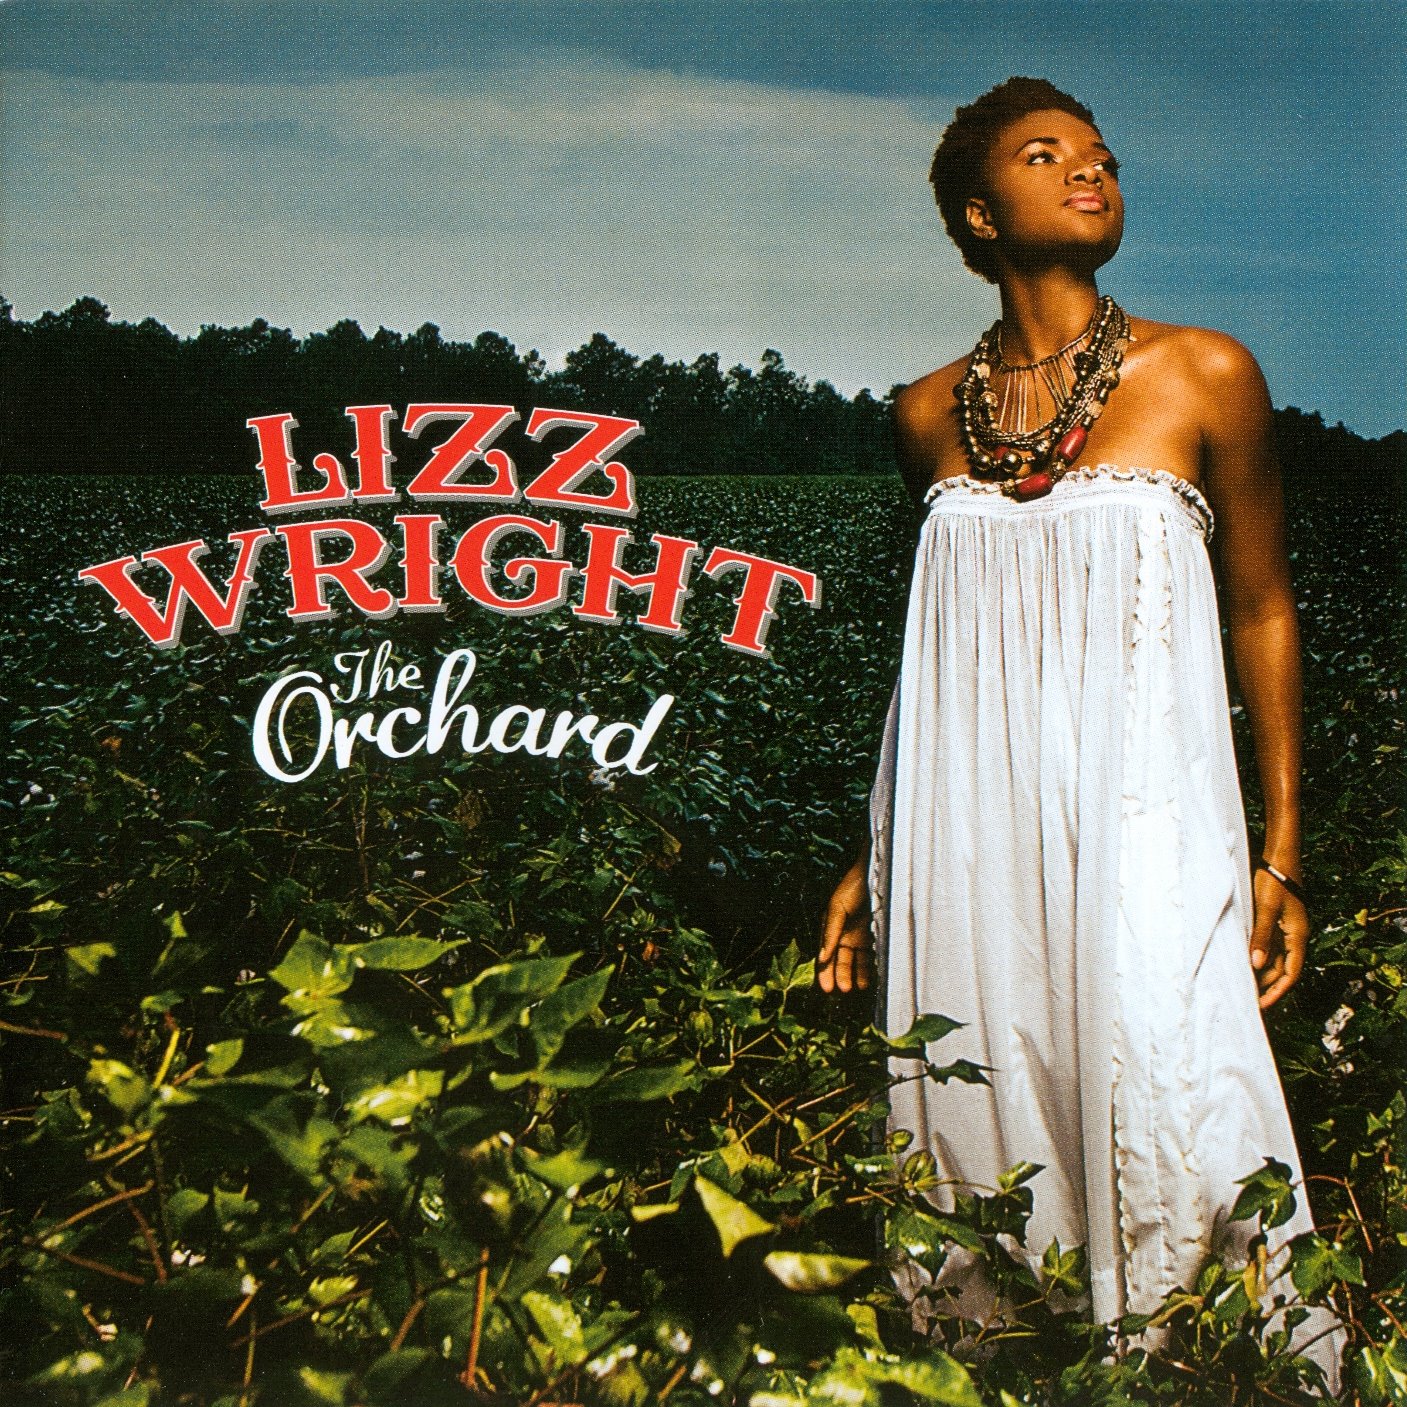 [Lizz+Wright+-+The+Orchard+(Front).jpg]